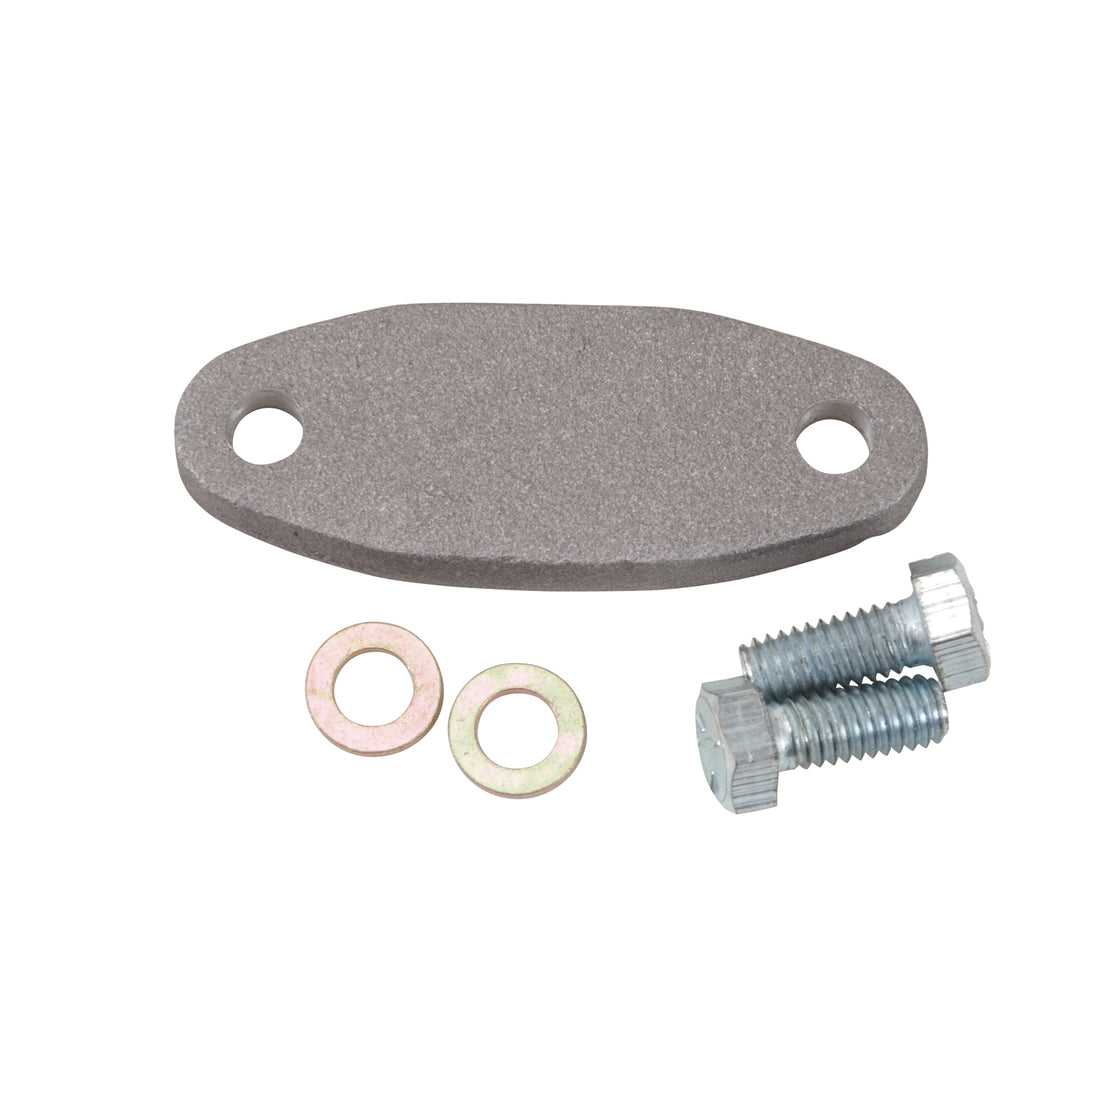 Replacement Choke Adapter Plate for #2161 Big-Block Chevy Edelbrock